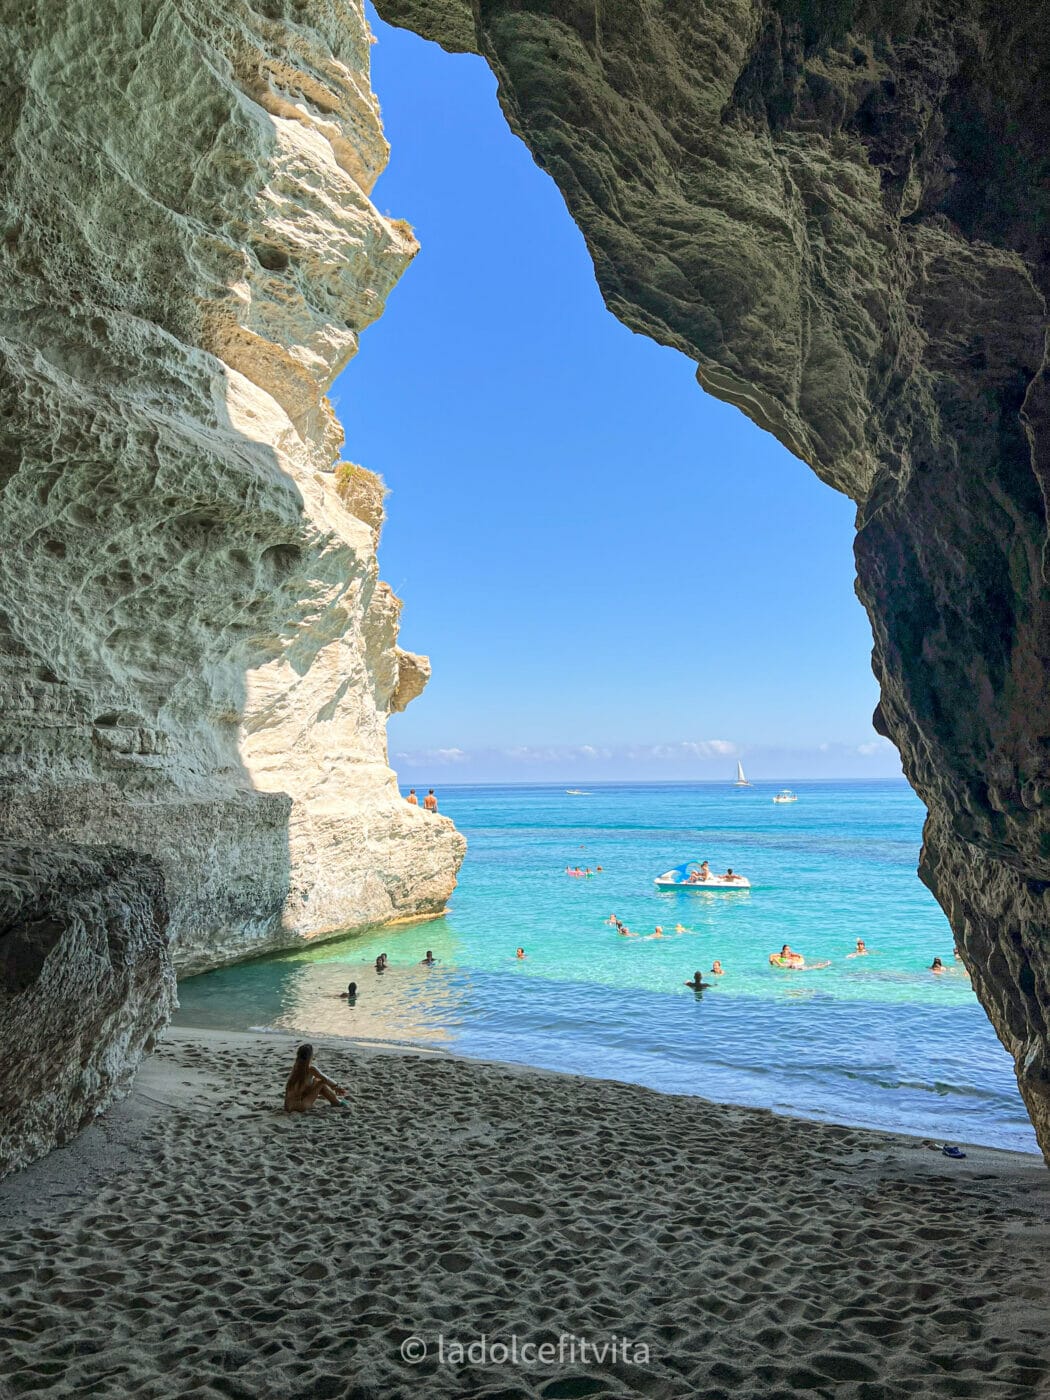 a woman sitting in sand underneath a grotto looking out at turquoise sea waters in calabria italy